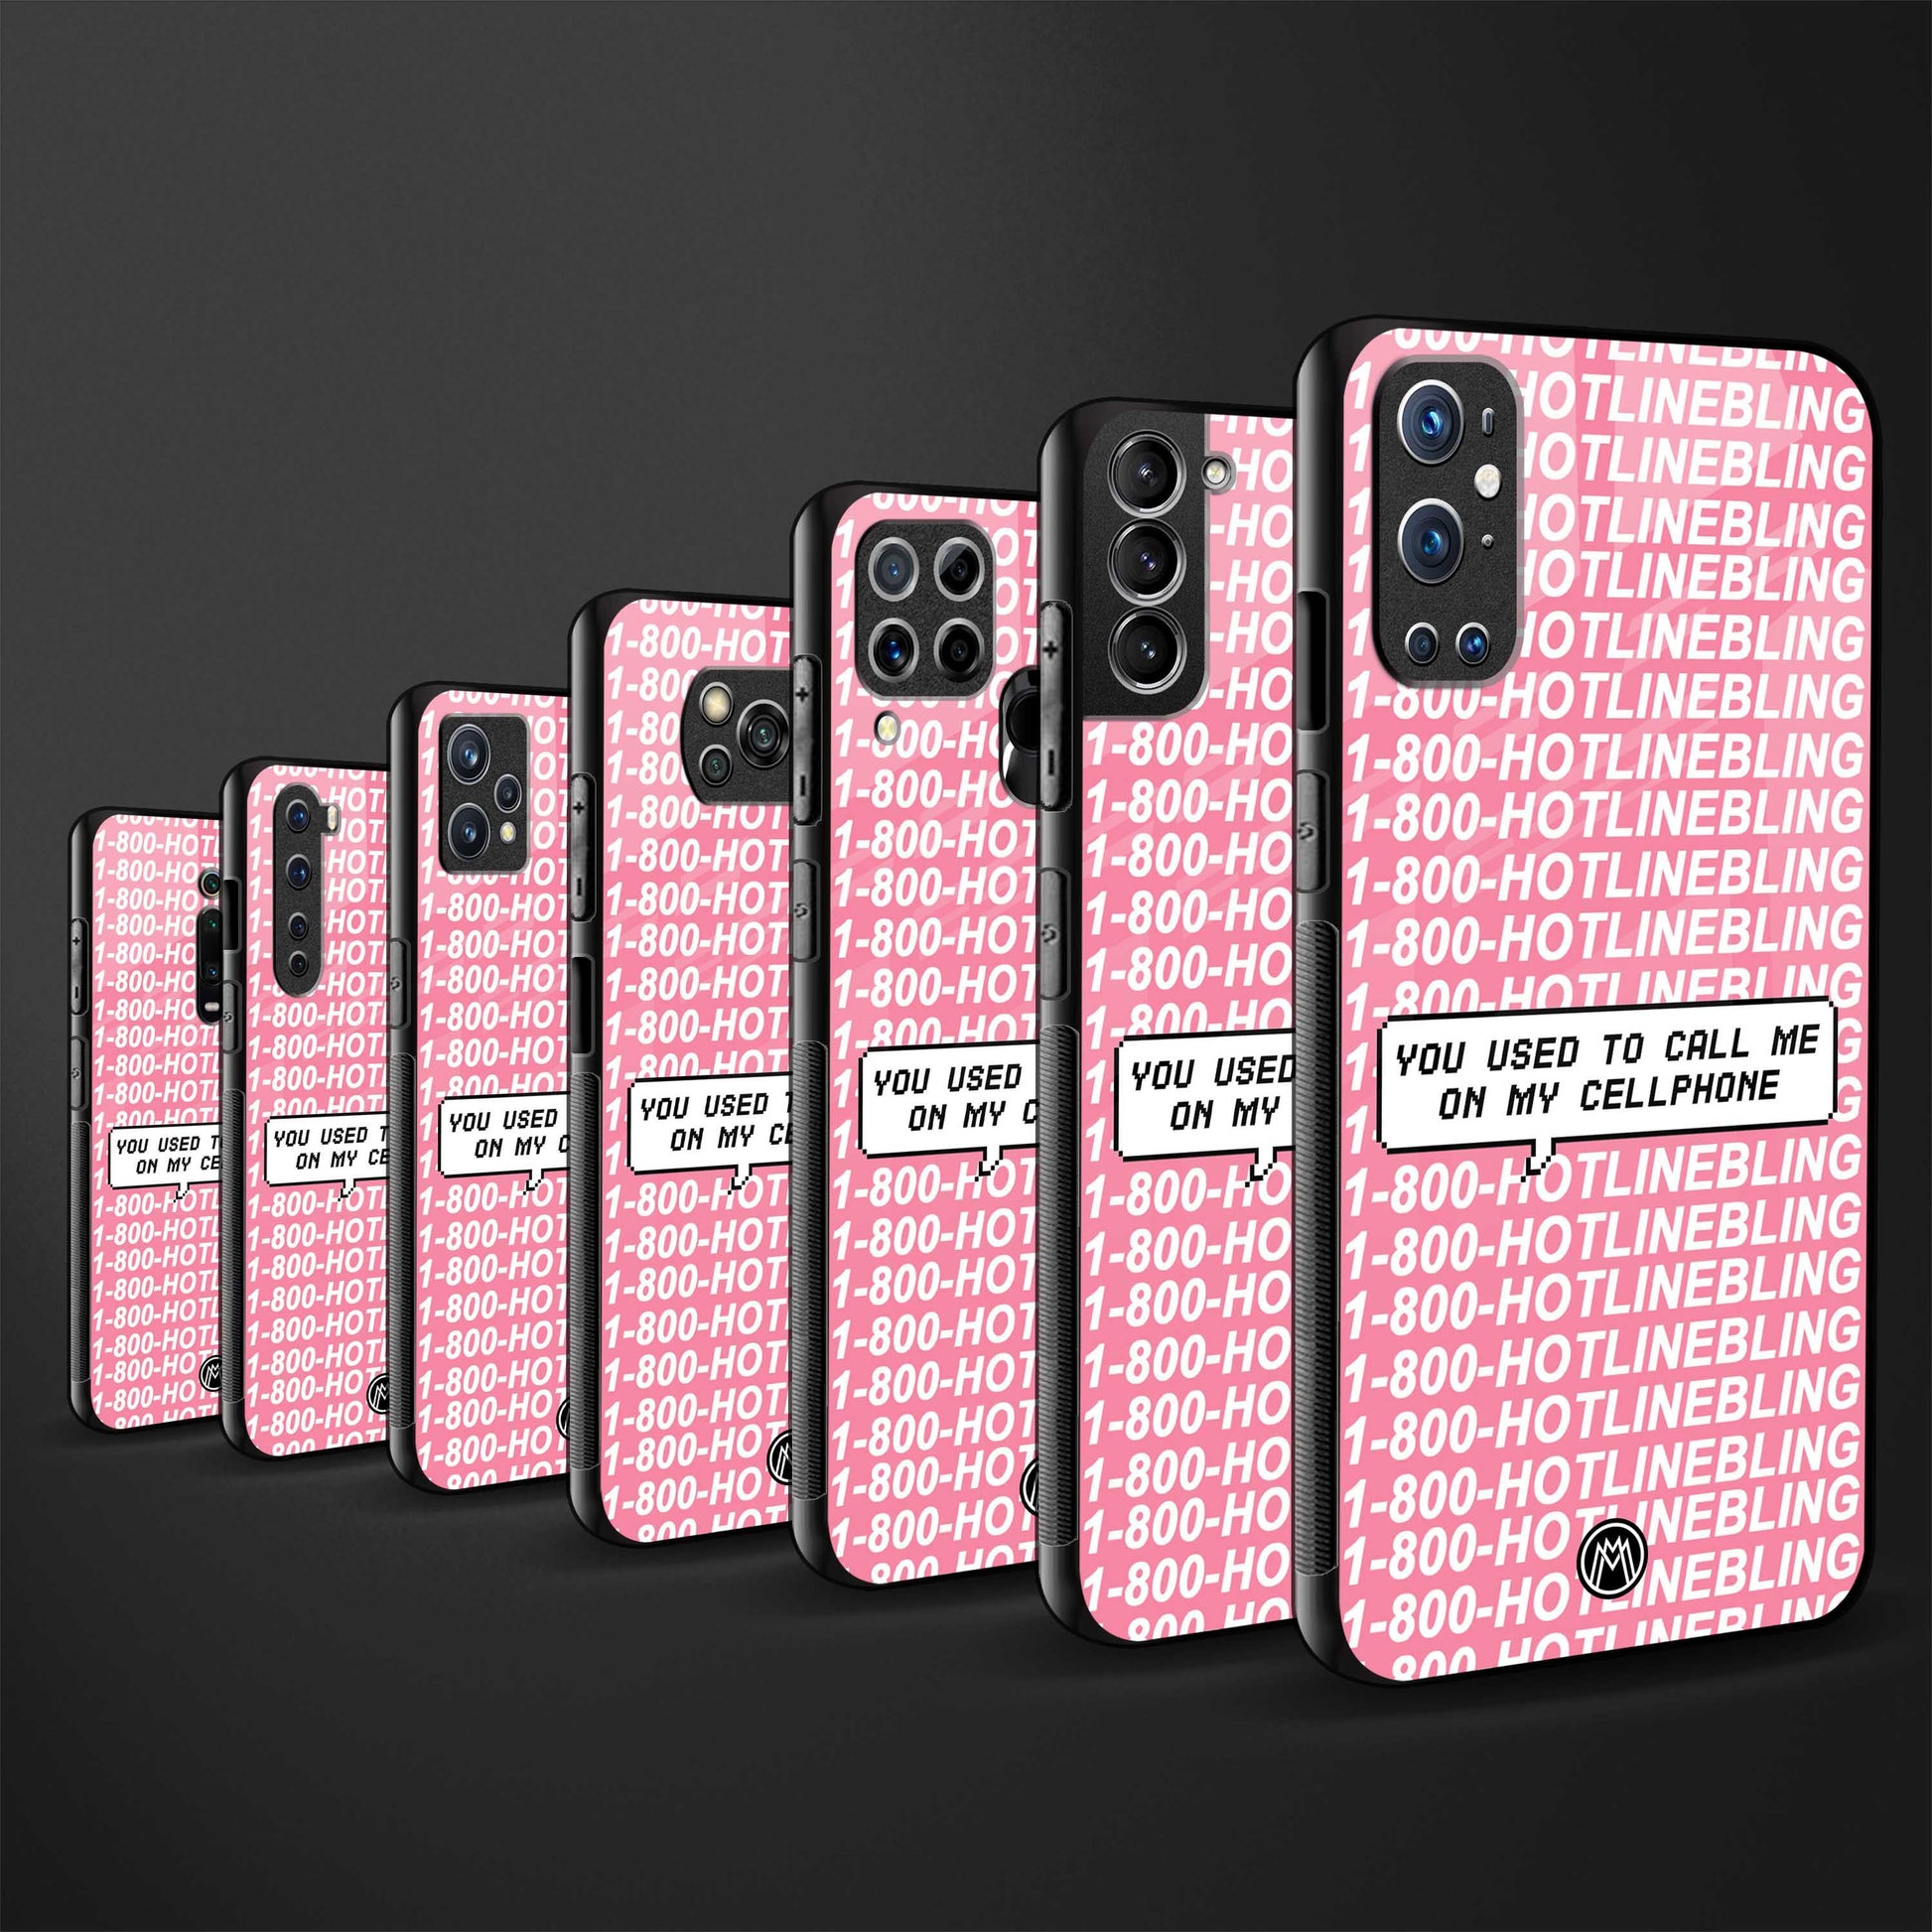 1800 hotline bling phone cover for iphone 6 plus 